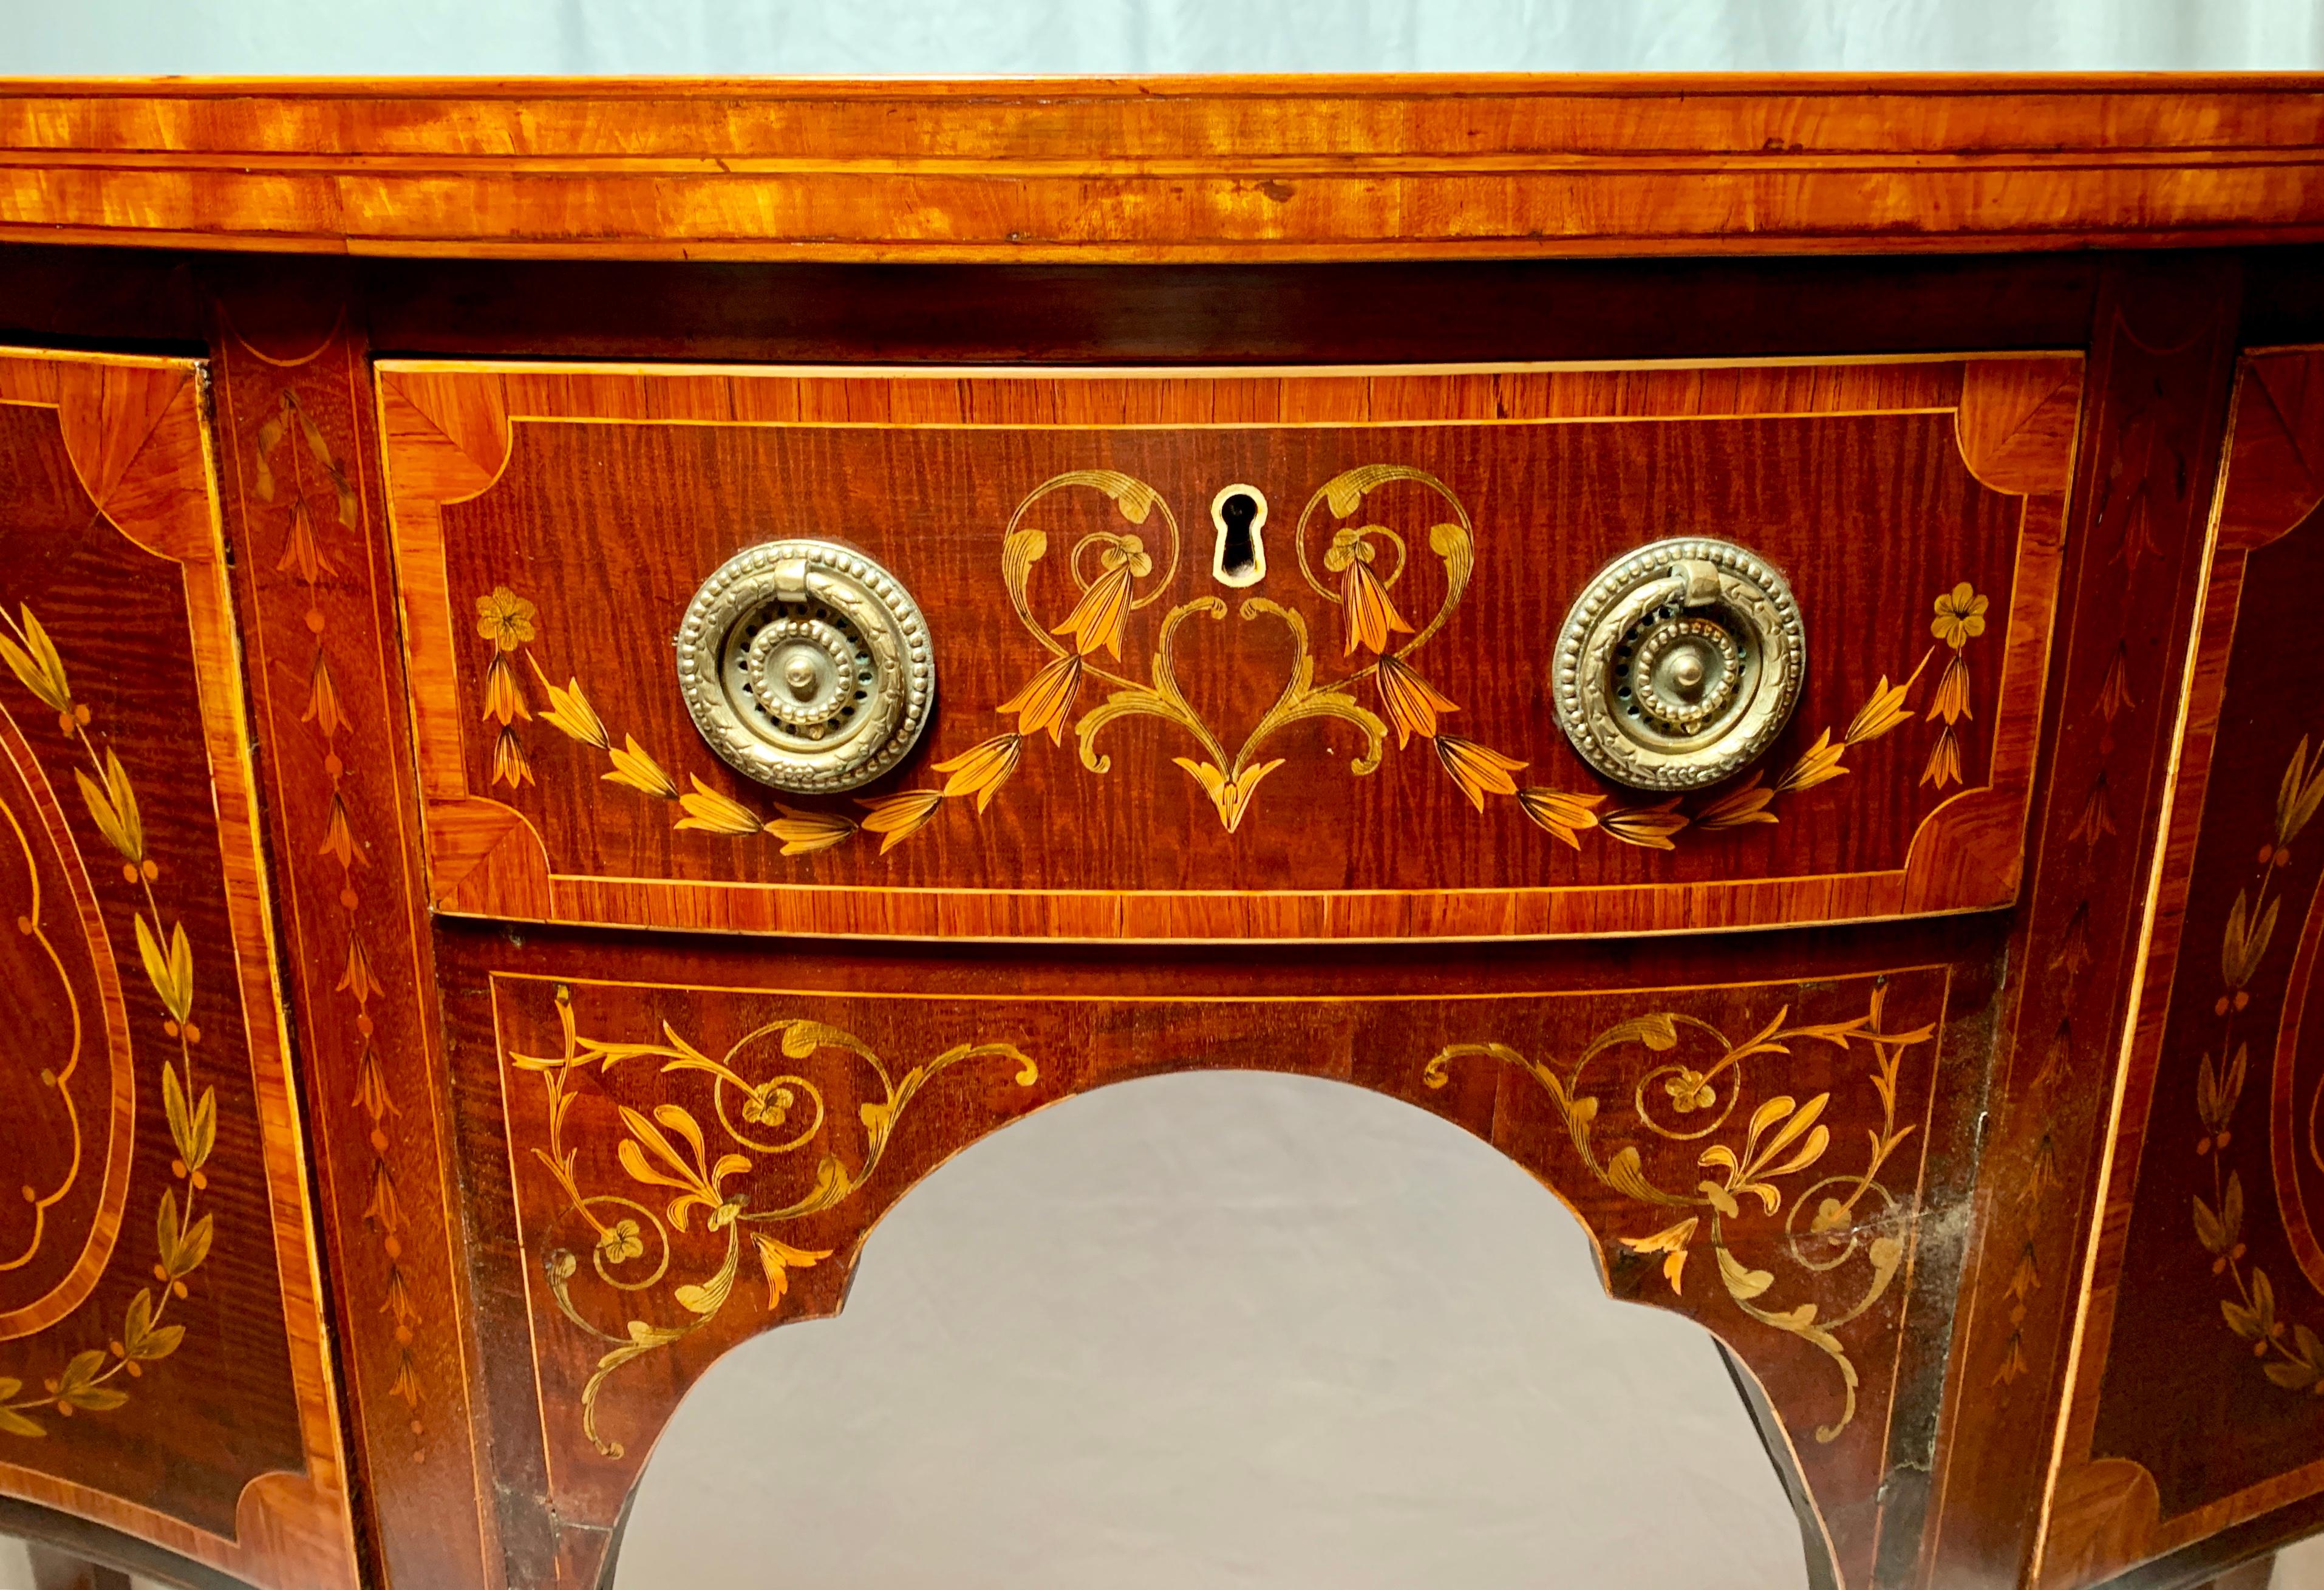 Beautifully inlaid with nice detail, this is a charming sideboard.

